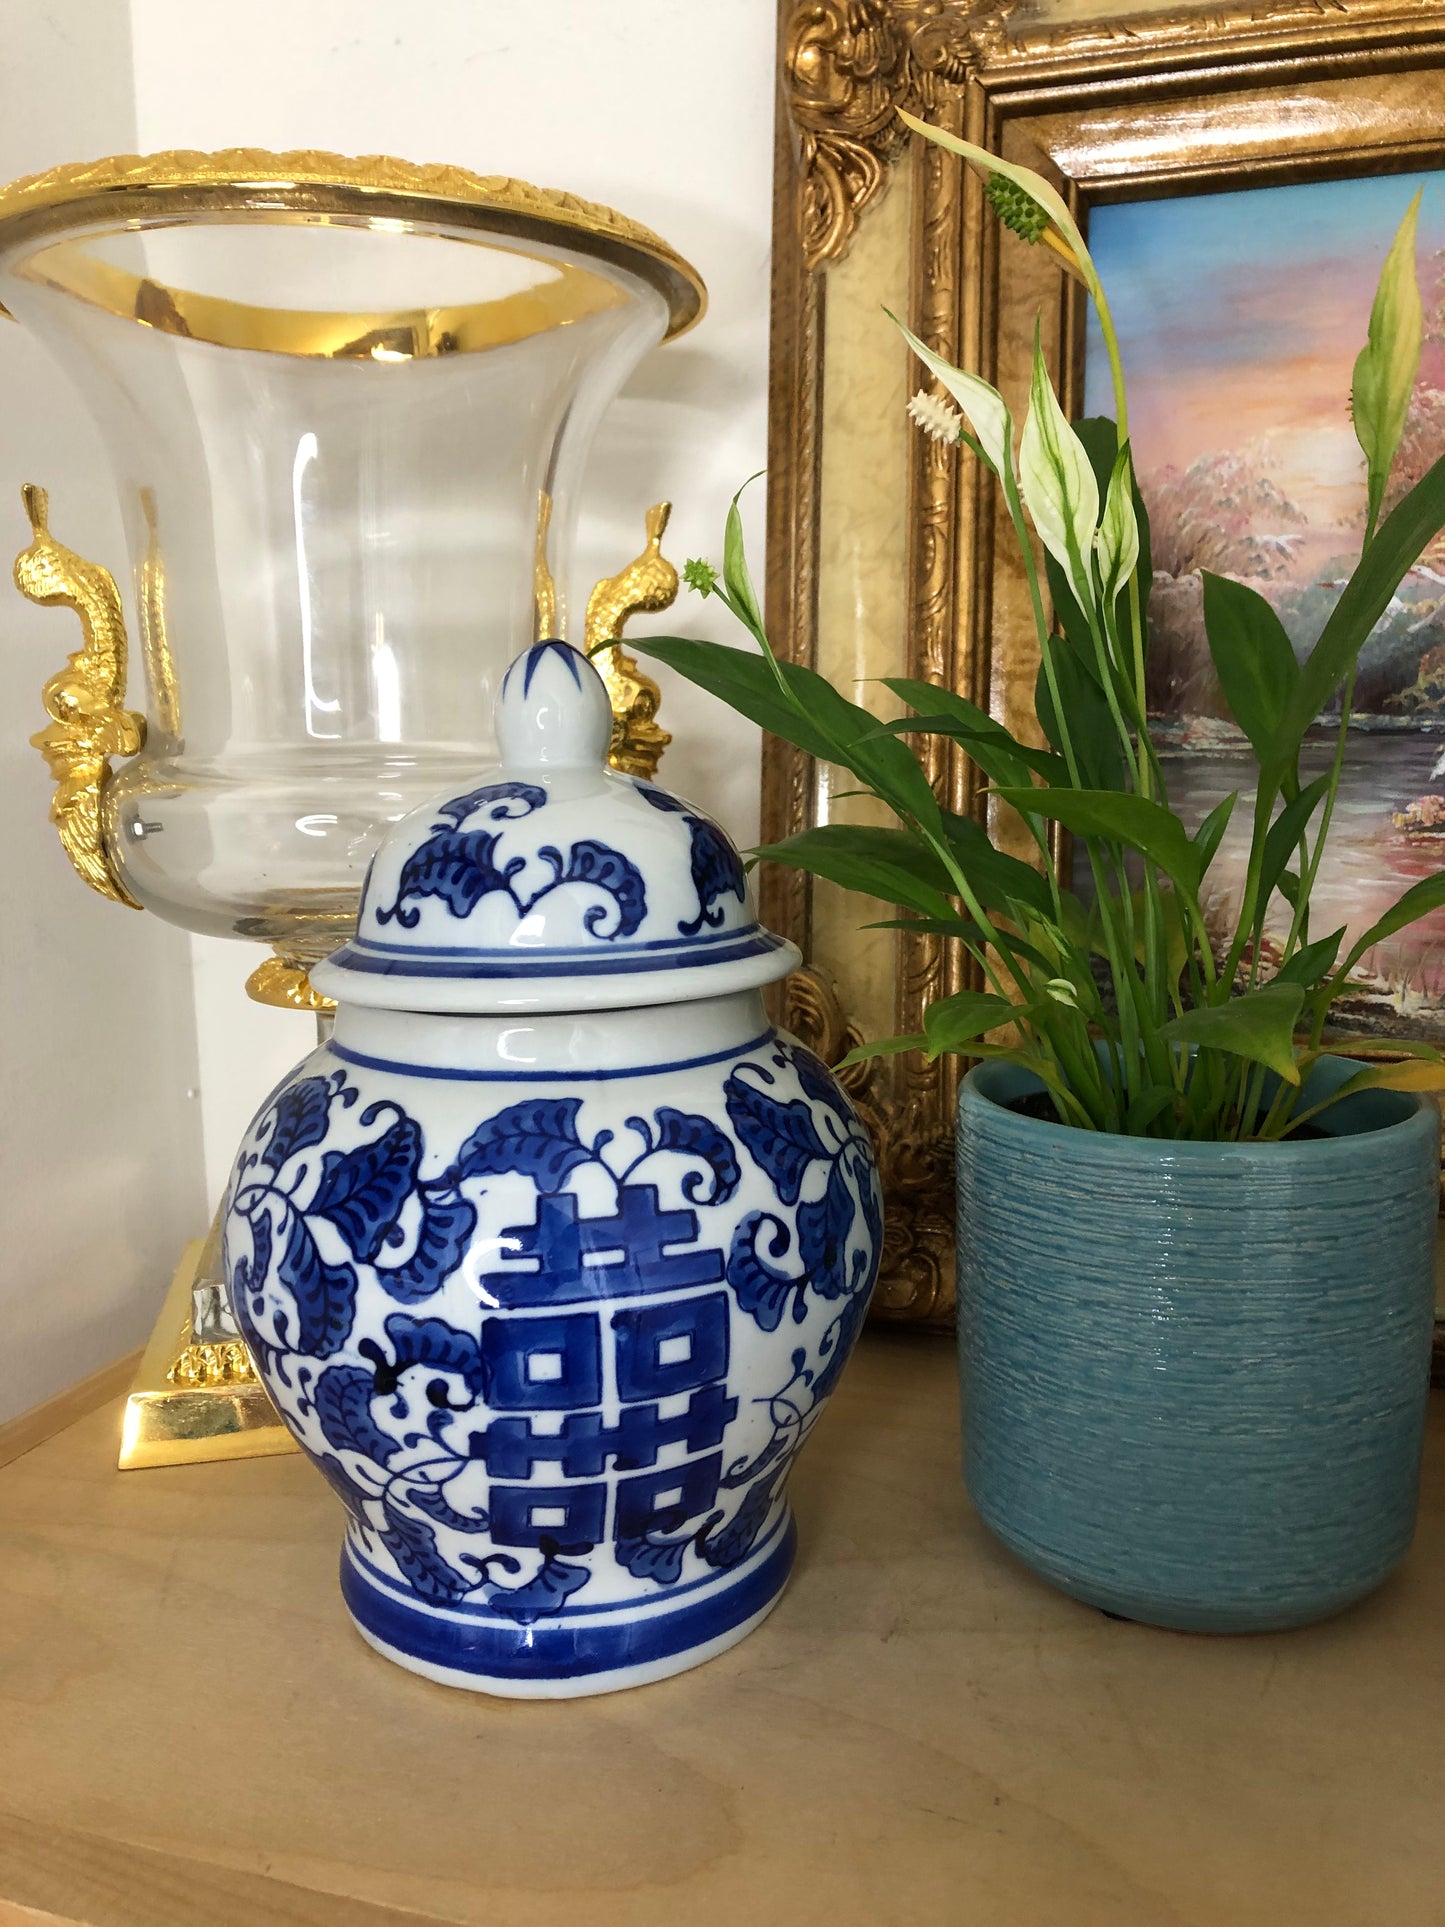 Gorgeous Double Happiness Blue and White Ginger Jar - Excellent Condition!